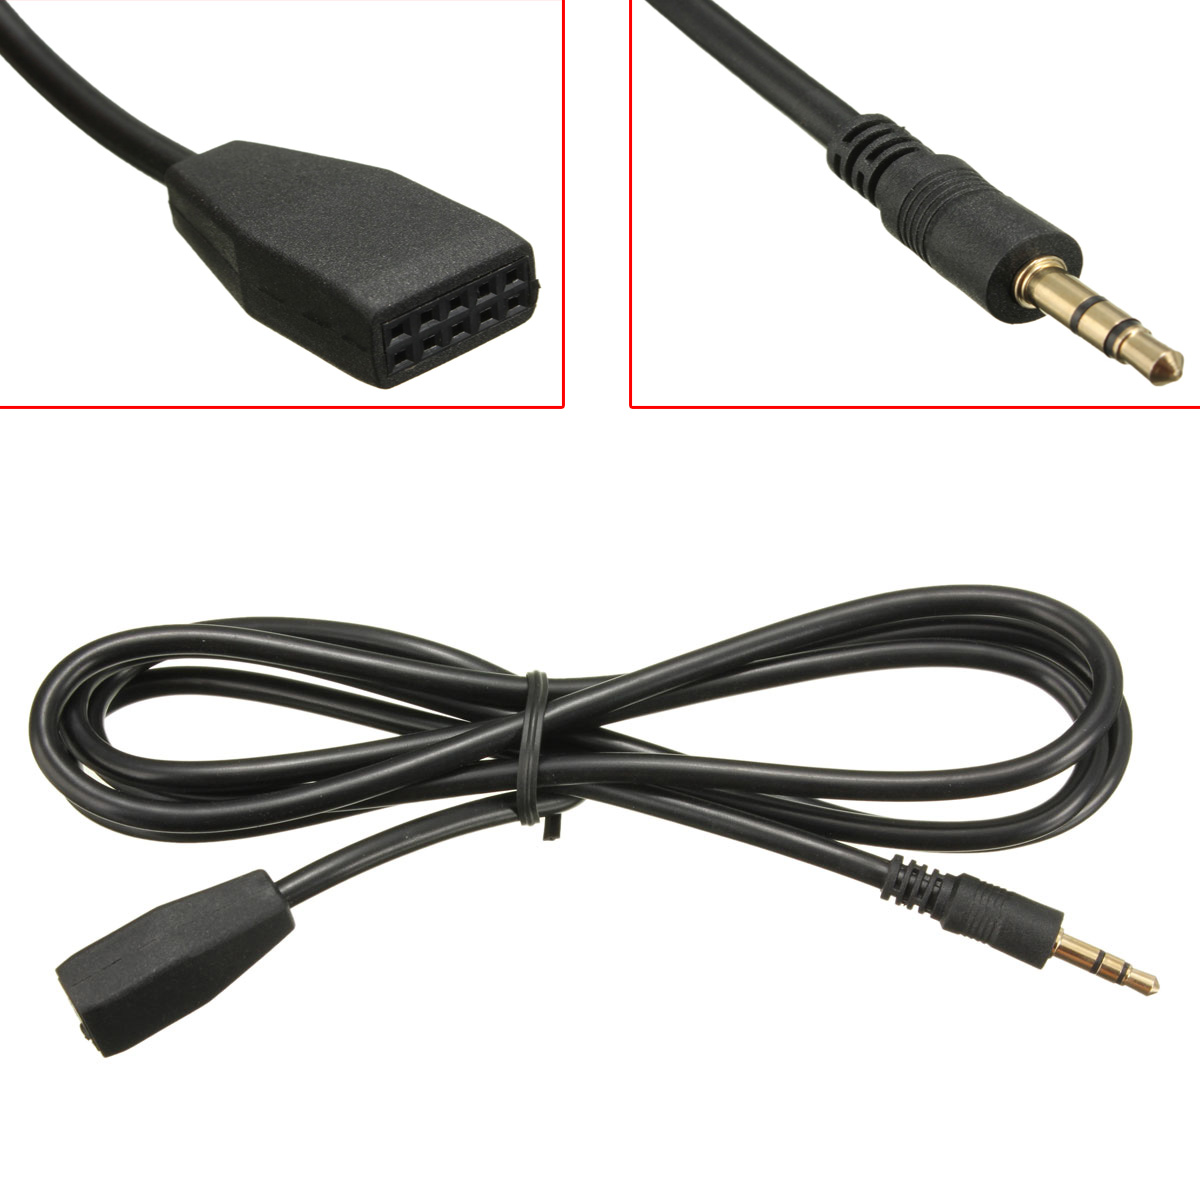 

AUX In Input Cable Adaptor 3.5mm For BMW E46 CD Radio iPod iPhone iPad MP4 MP3